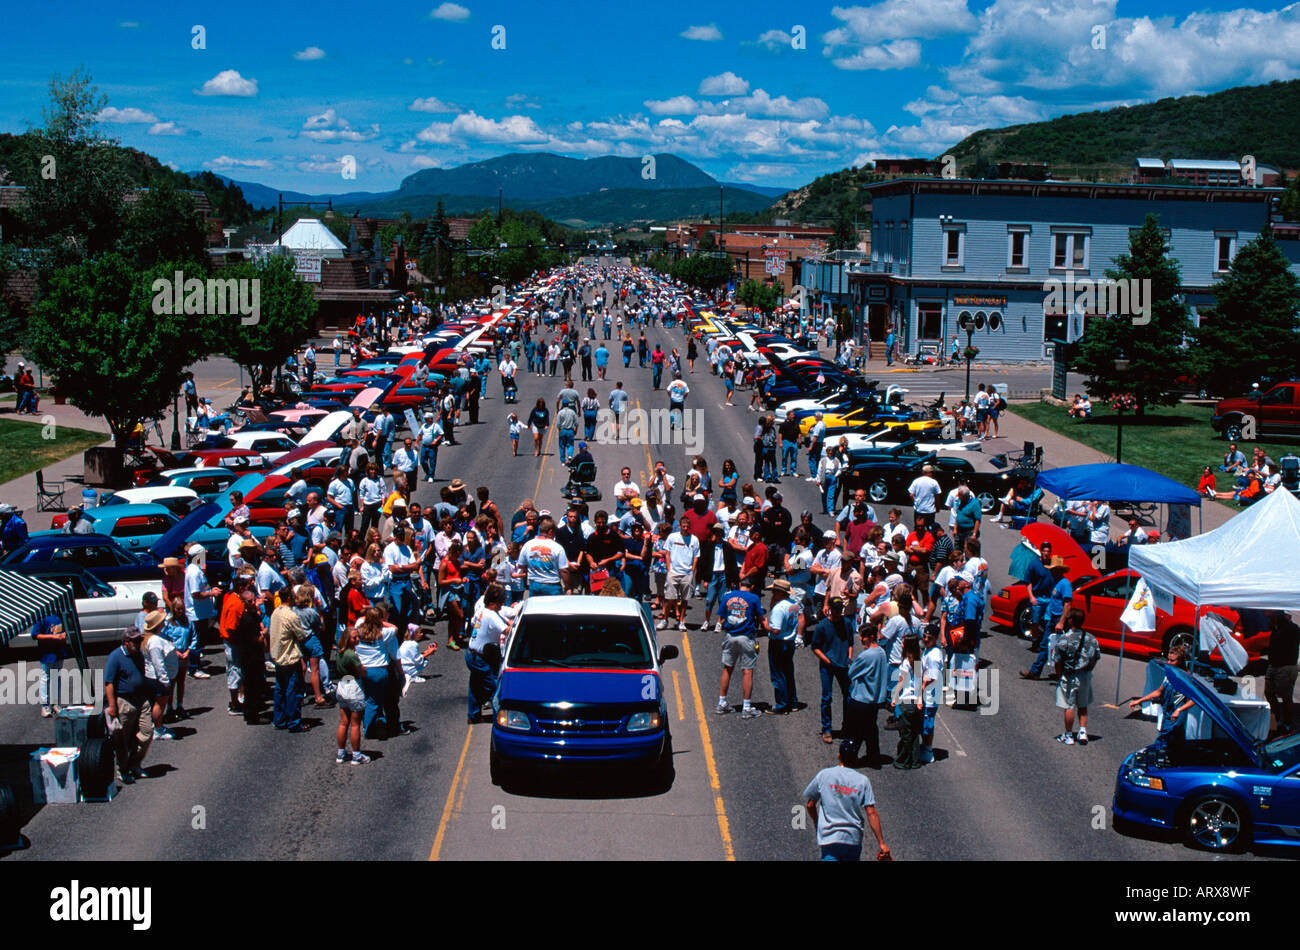 Crowd at Ford Mustang car show in Steamboat Springs Colorado USA Stock Photo